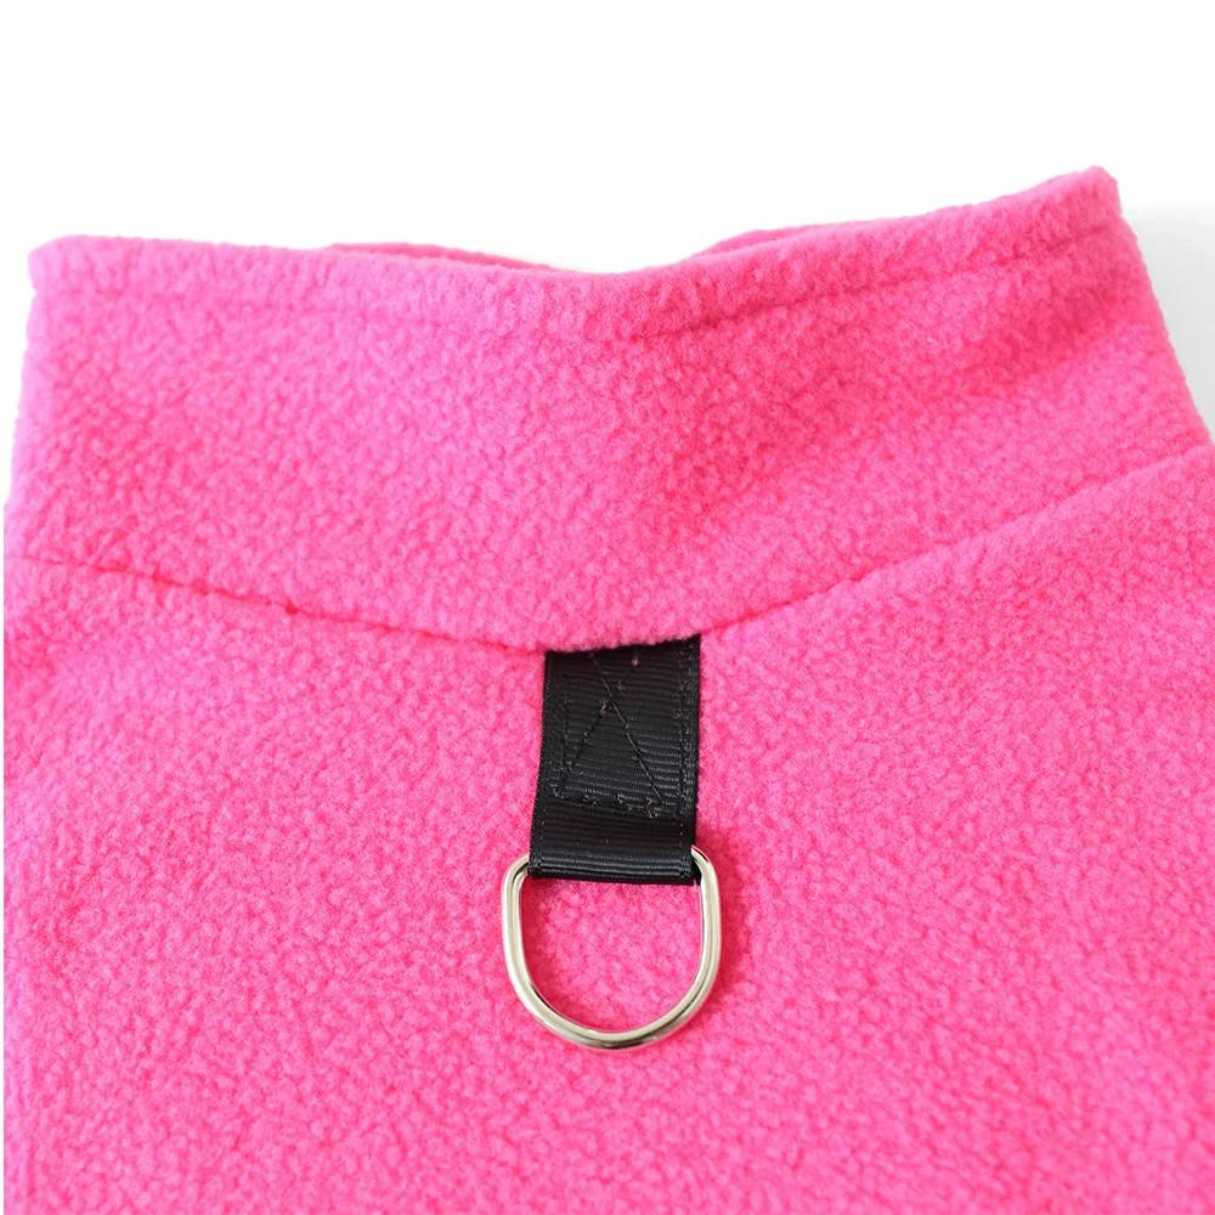 Barkie Doll Pink close up vest for dogs attachable holder for the leads.